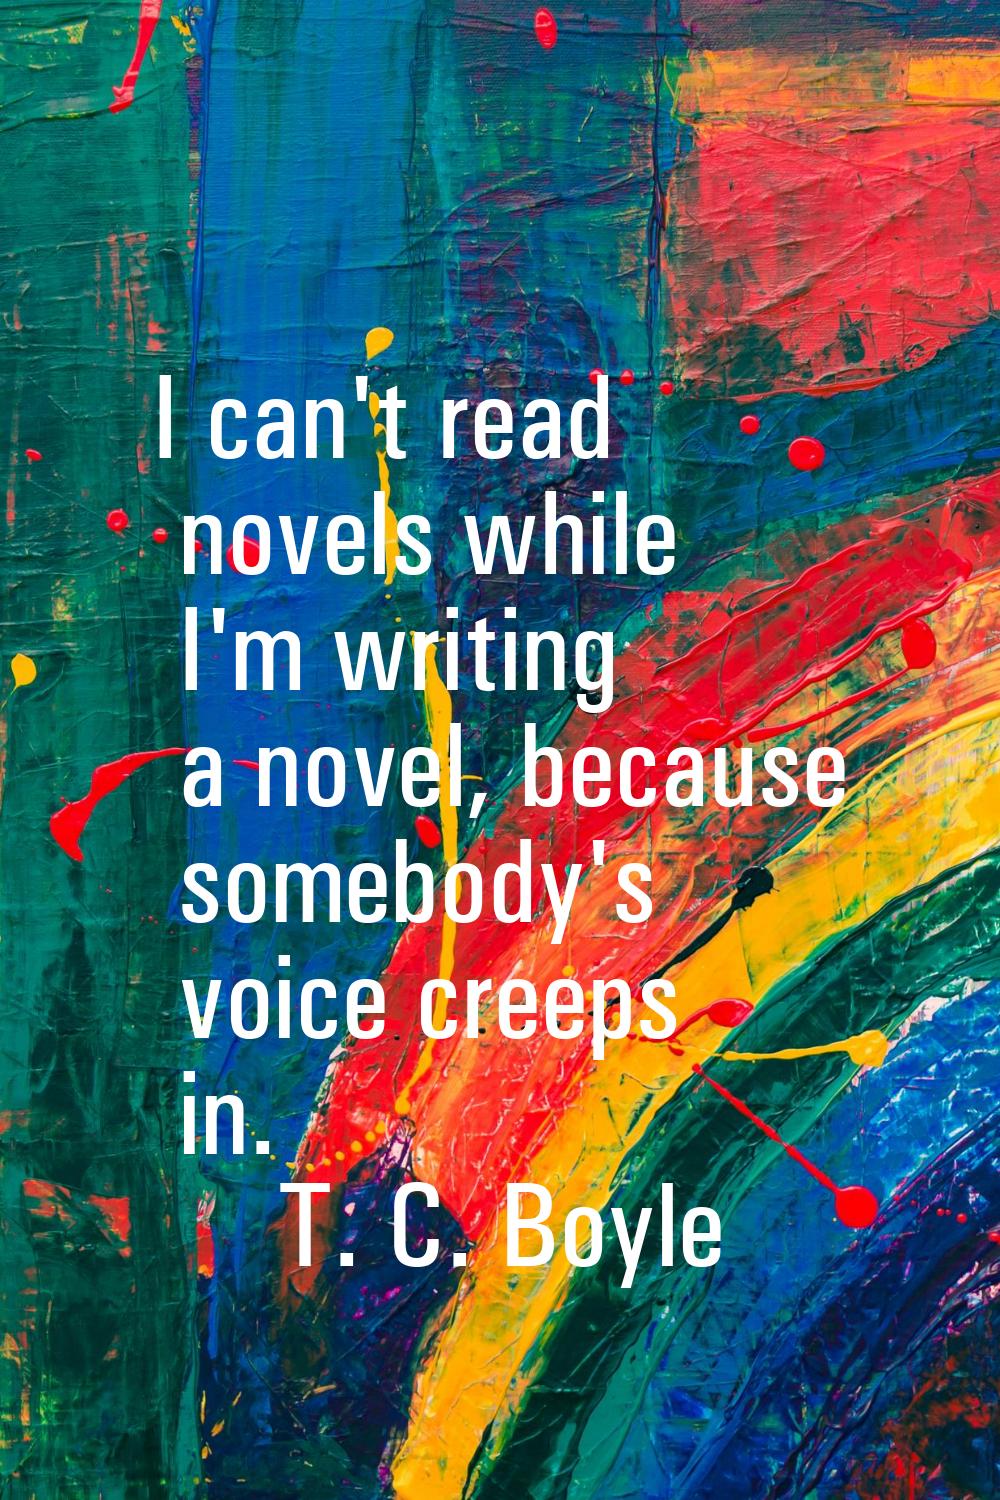 I can't read novels while I'm writing a novel, because somebody's voice creeps in.